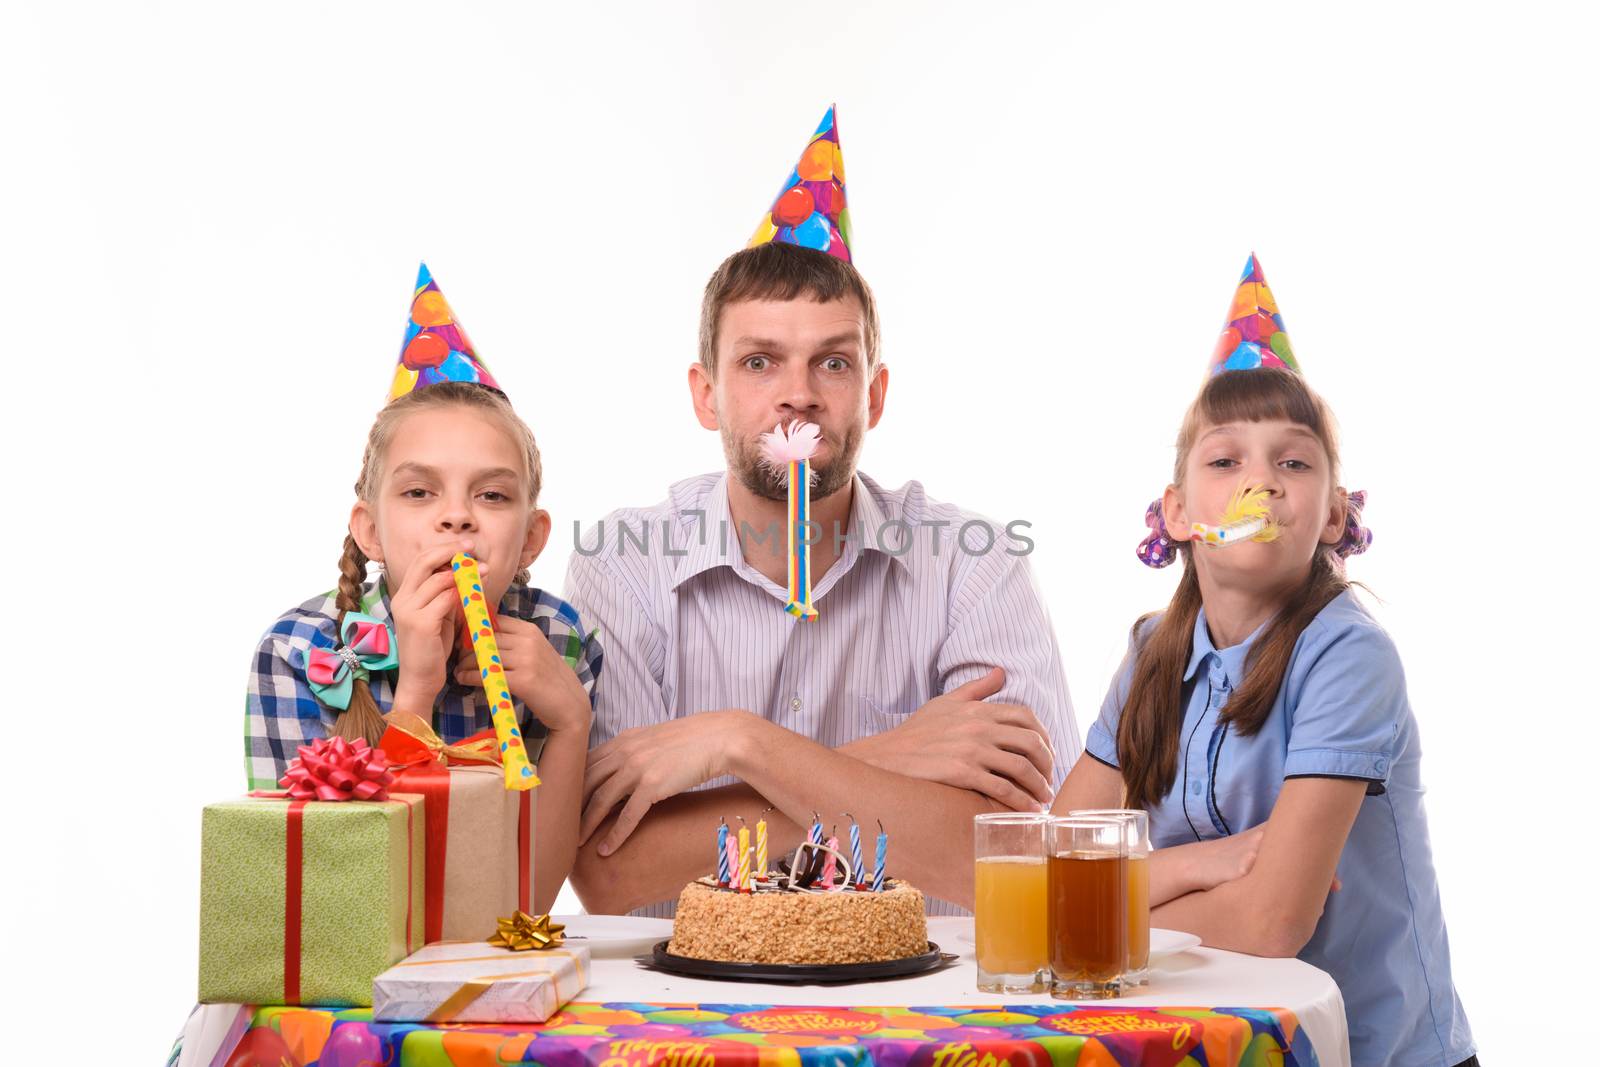 Kids at birthday party have fun blowing whistles